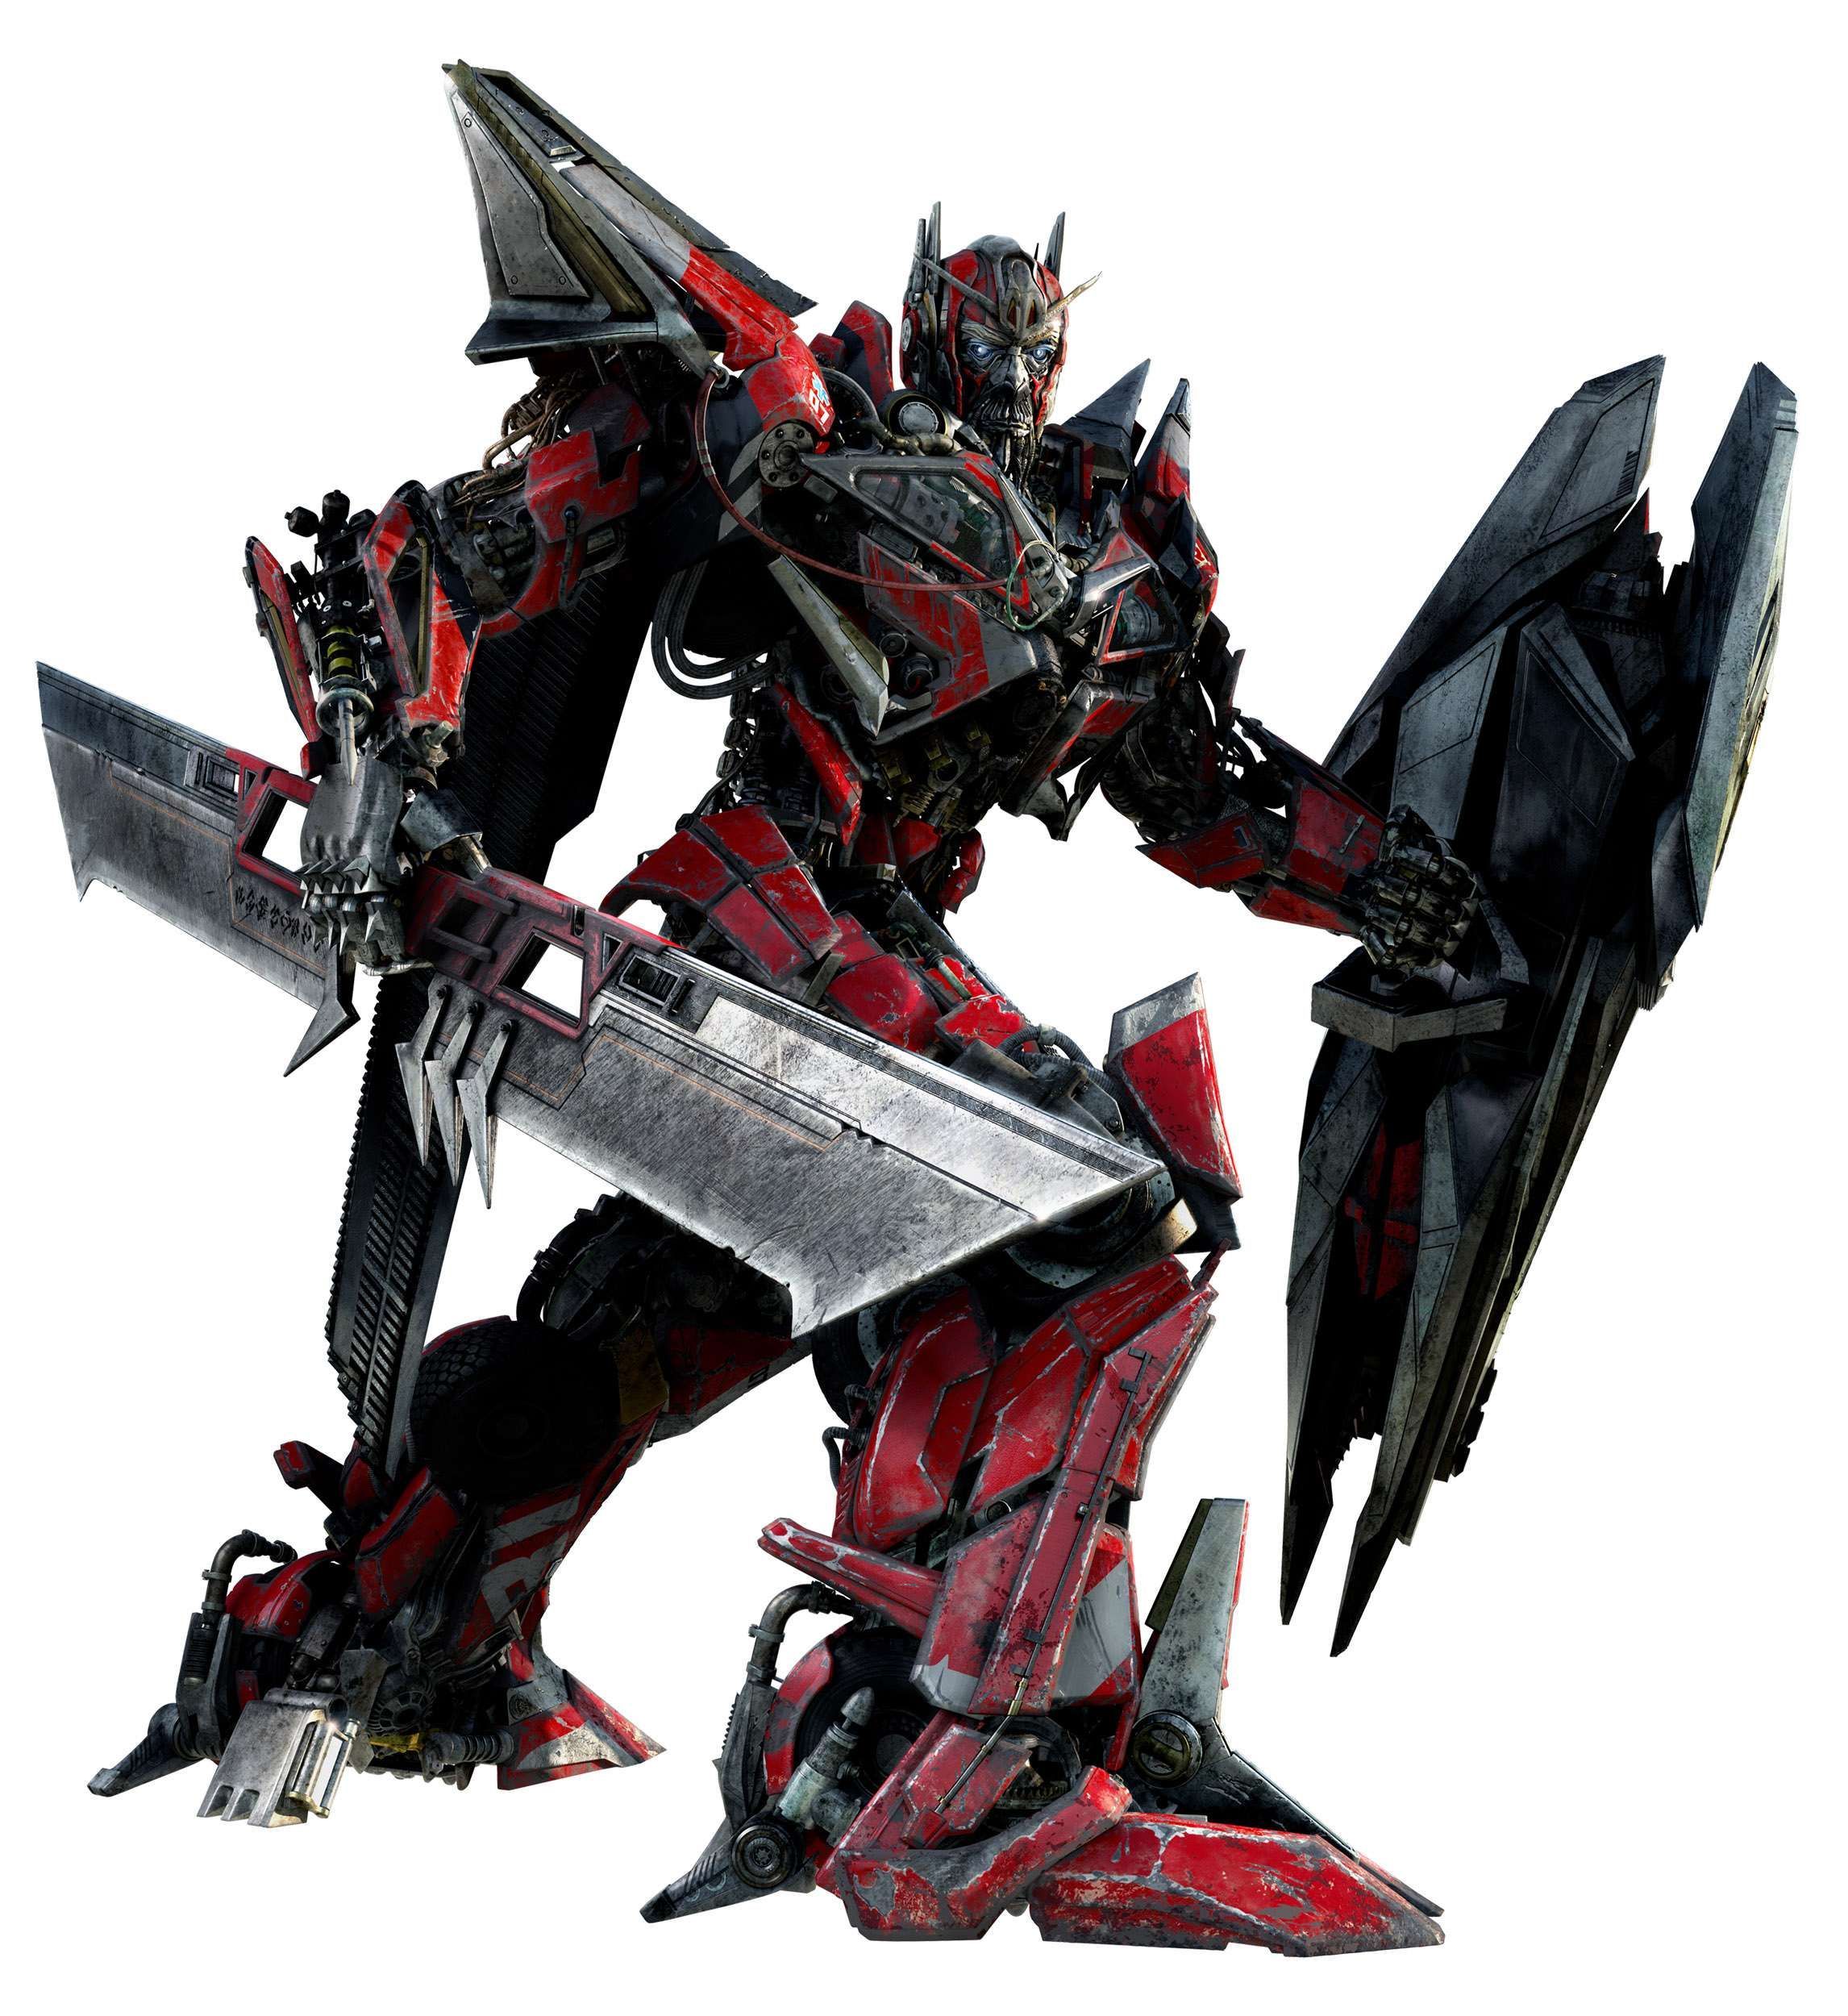 Best [tf] Sentinel prime image. Transformers, Transformers